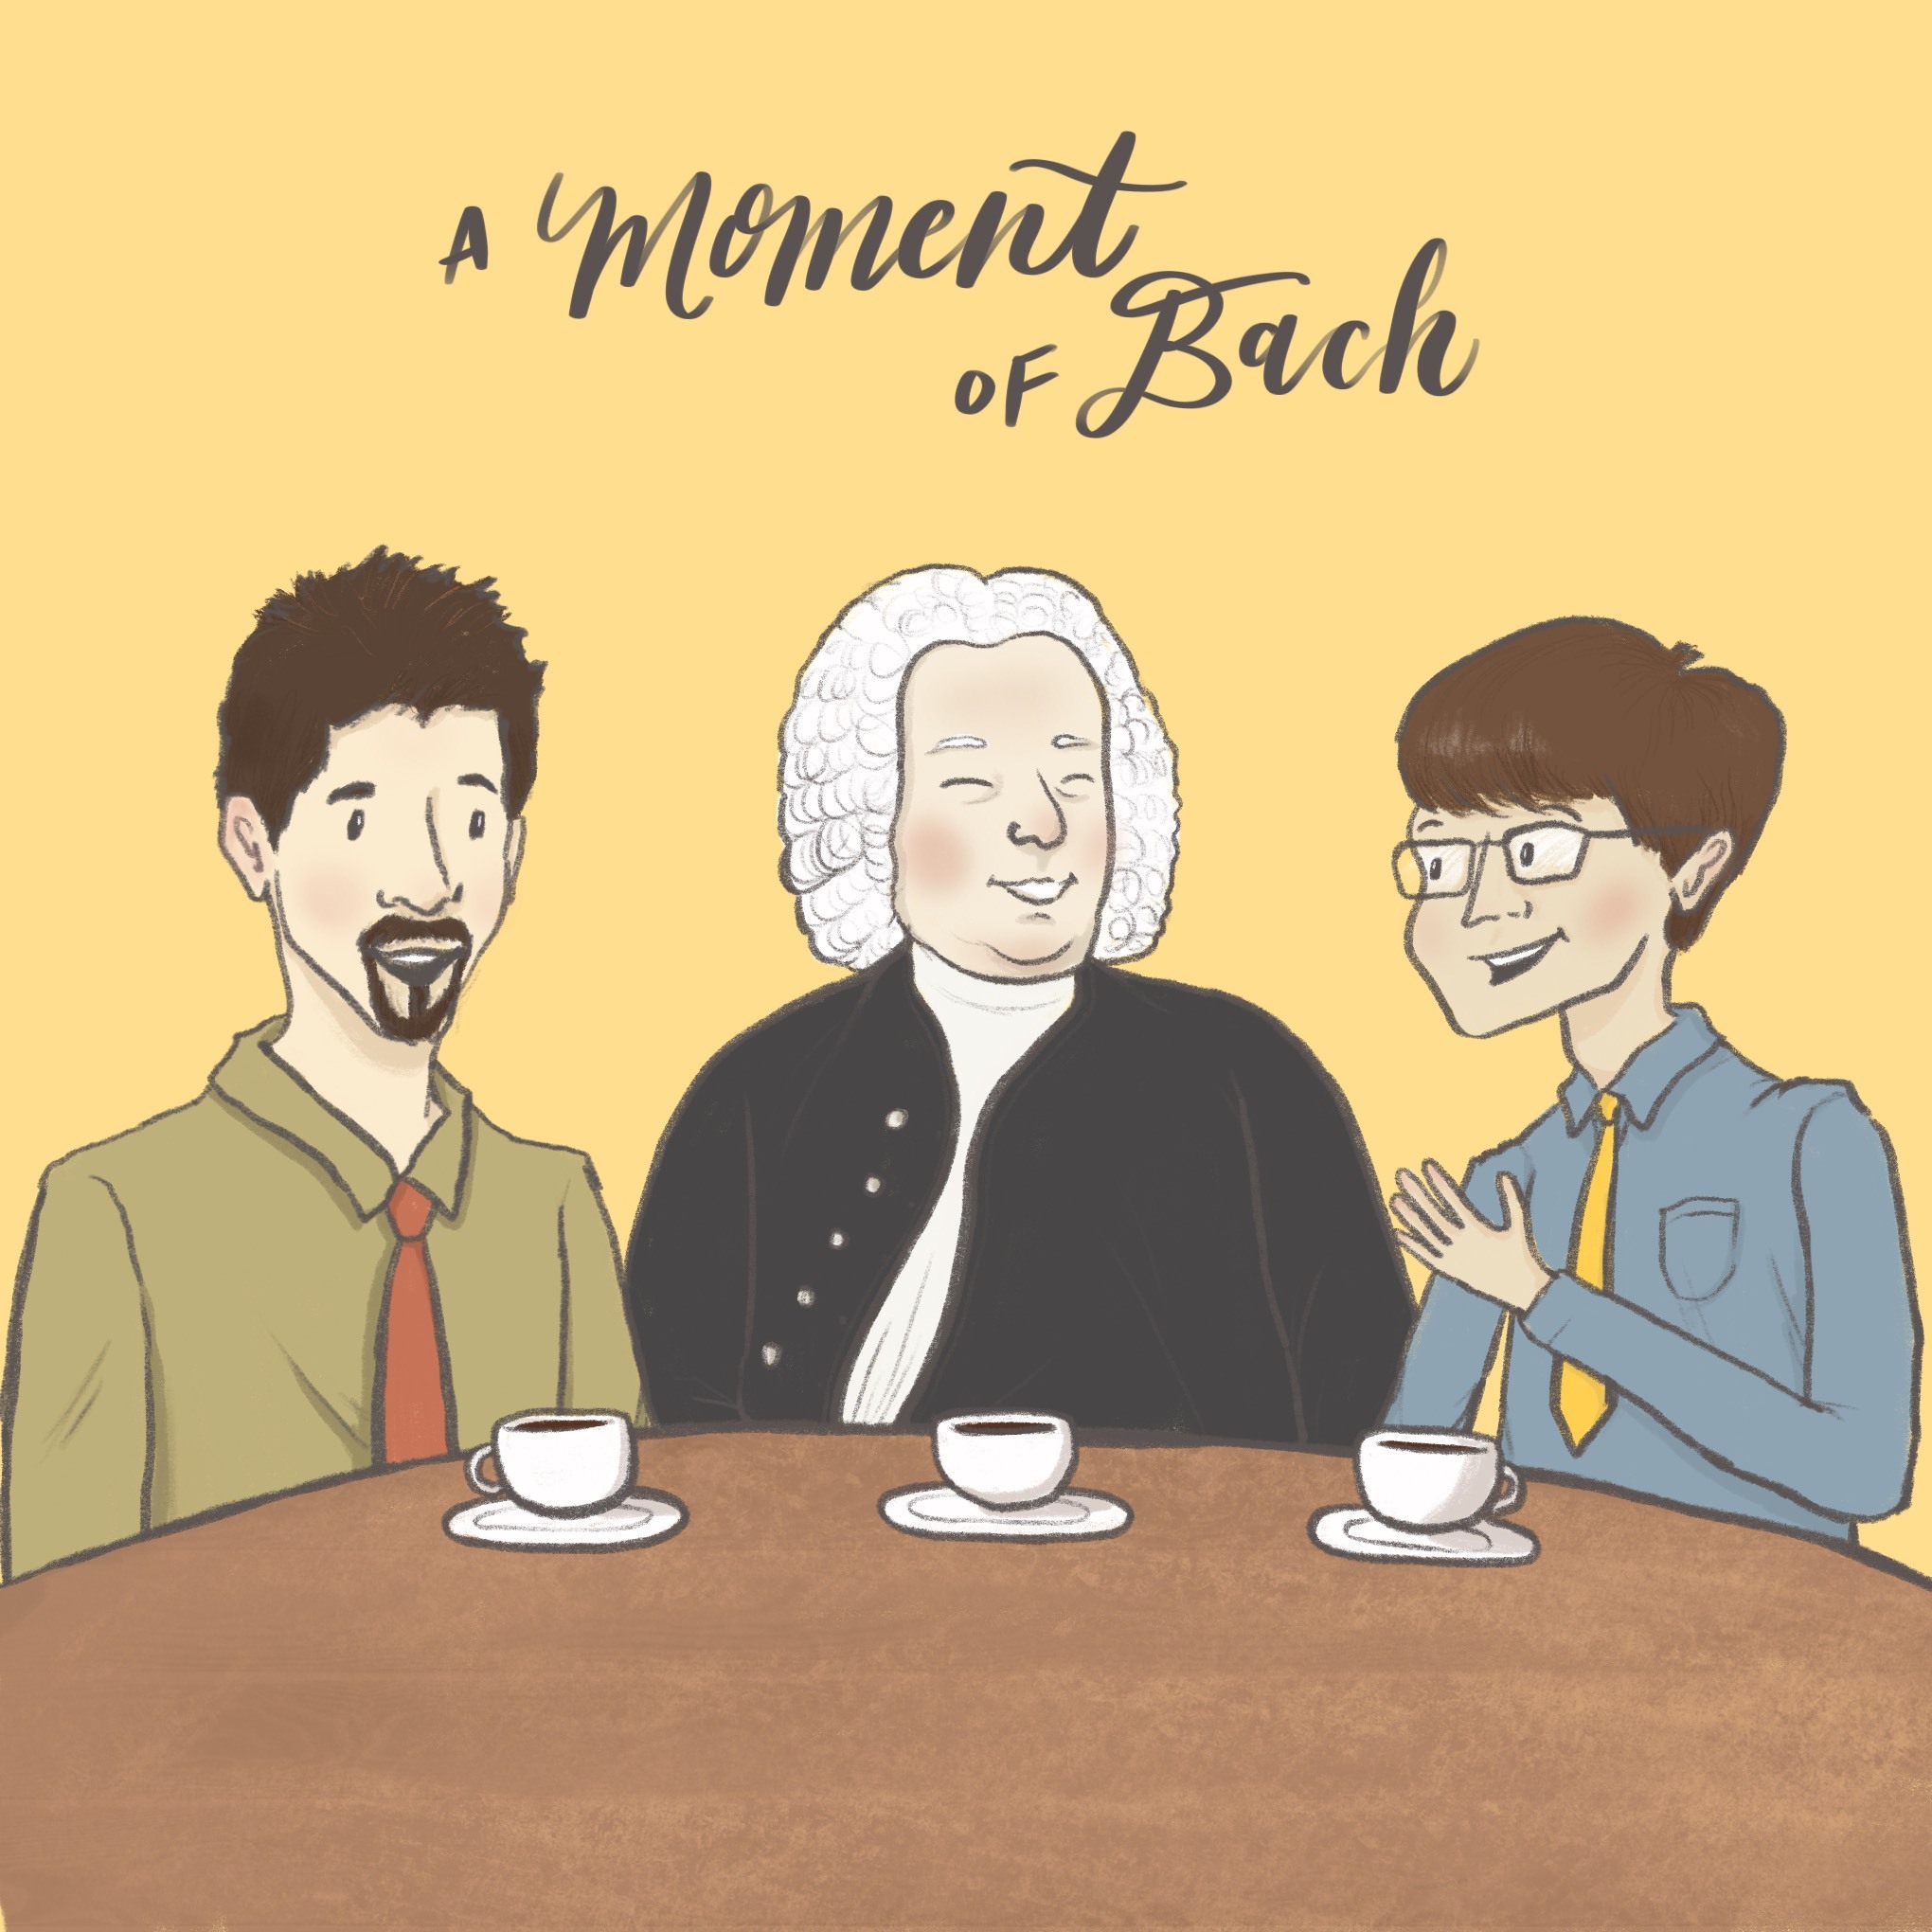 A Moment of Bach